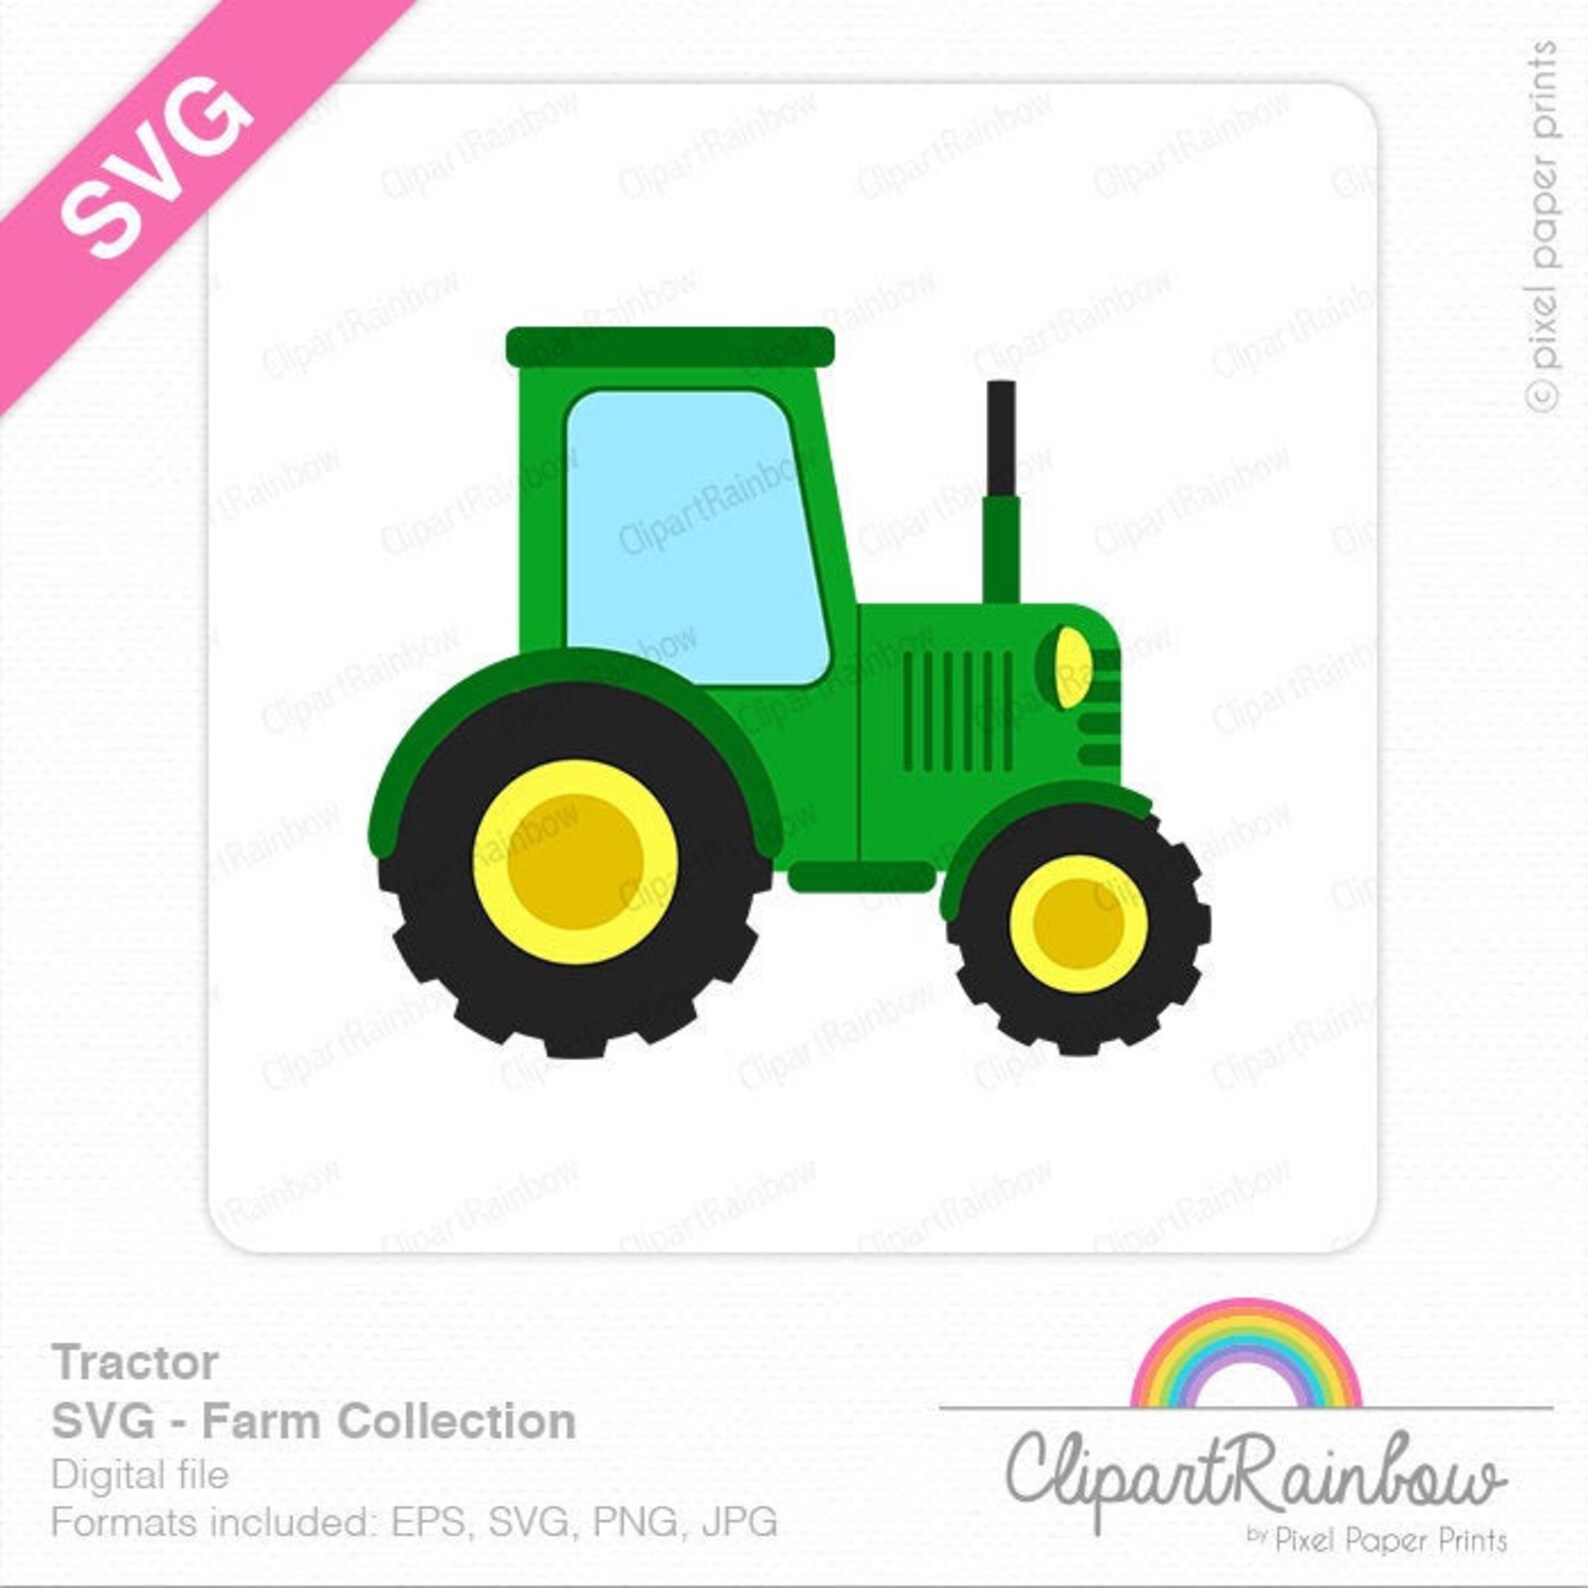 Tractor SVG Clipart Cut File Simple Tractor Instant Download - Etsy